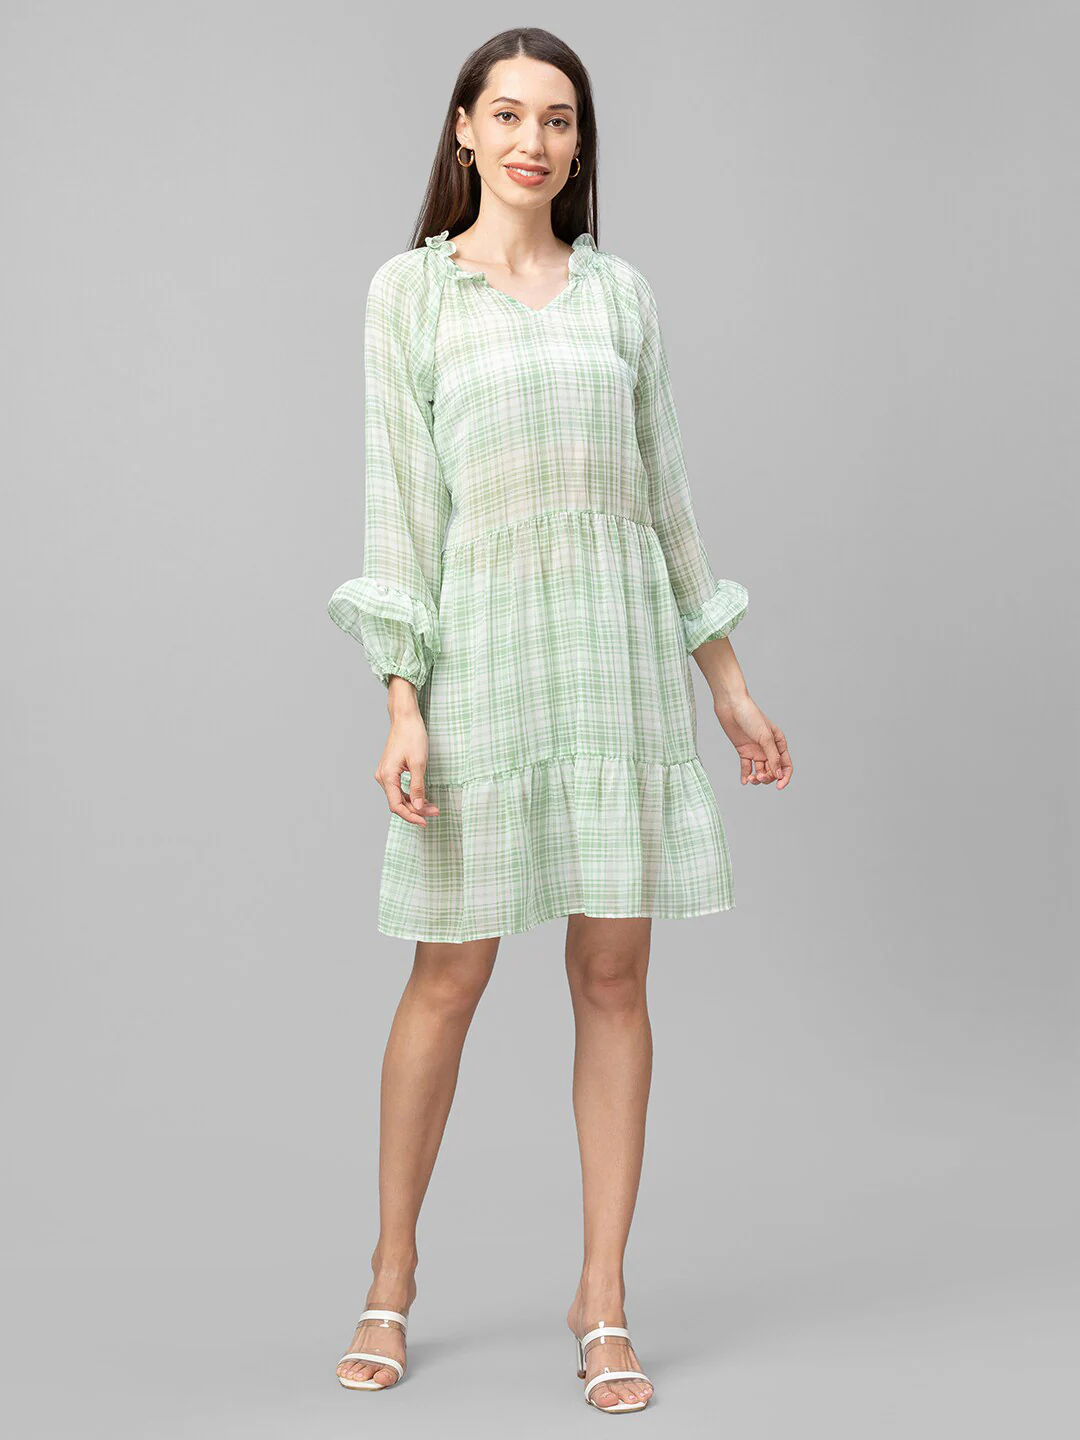 Globus Green Checked A-Line Dress